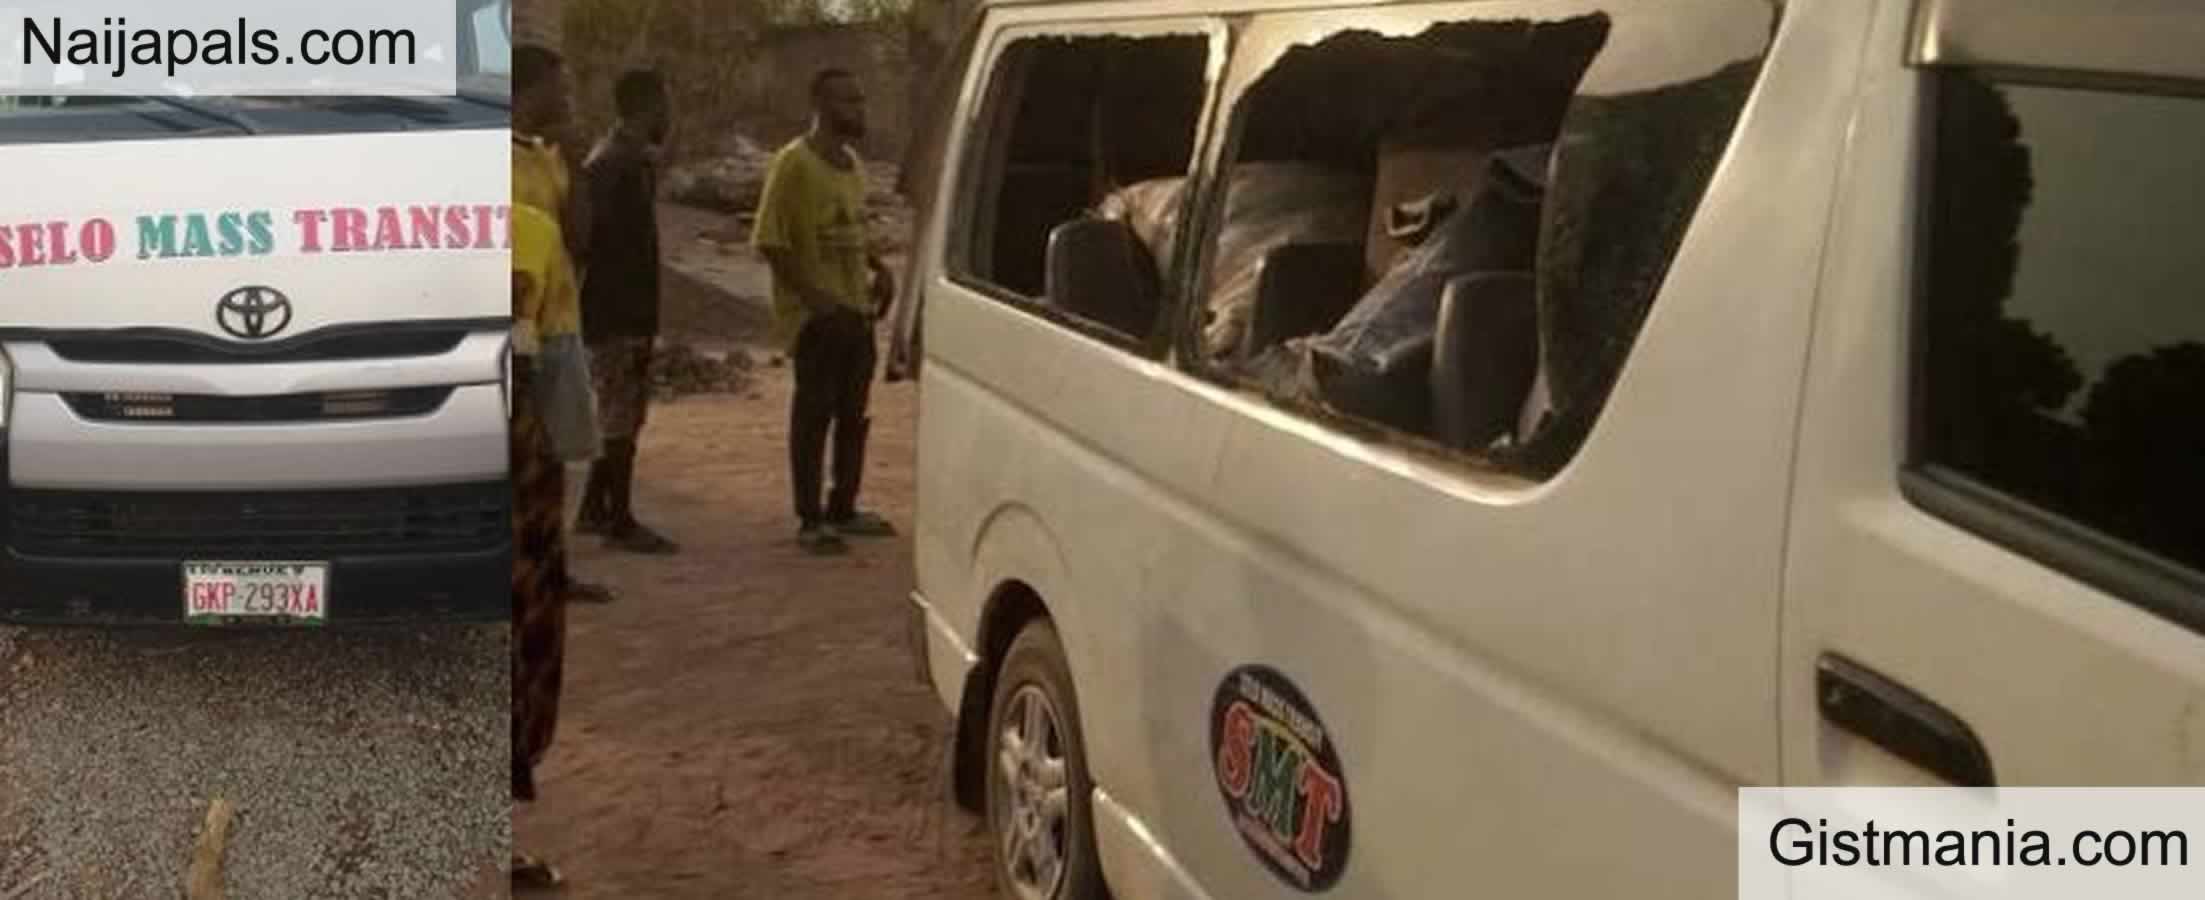 Tragedy As 4 Die In Bauchi Auto Crash, Over N1.6Million Recovered From Victims